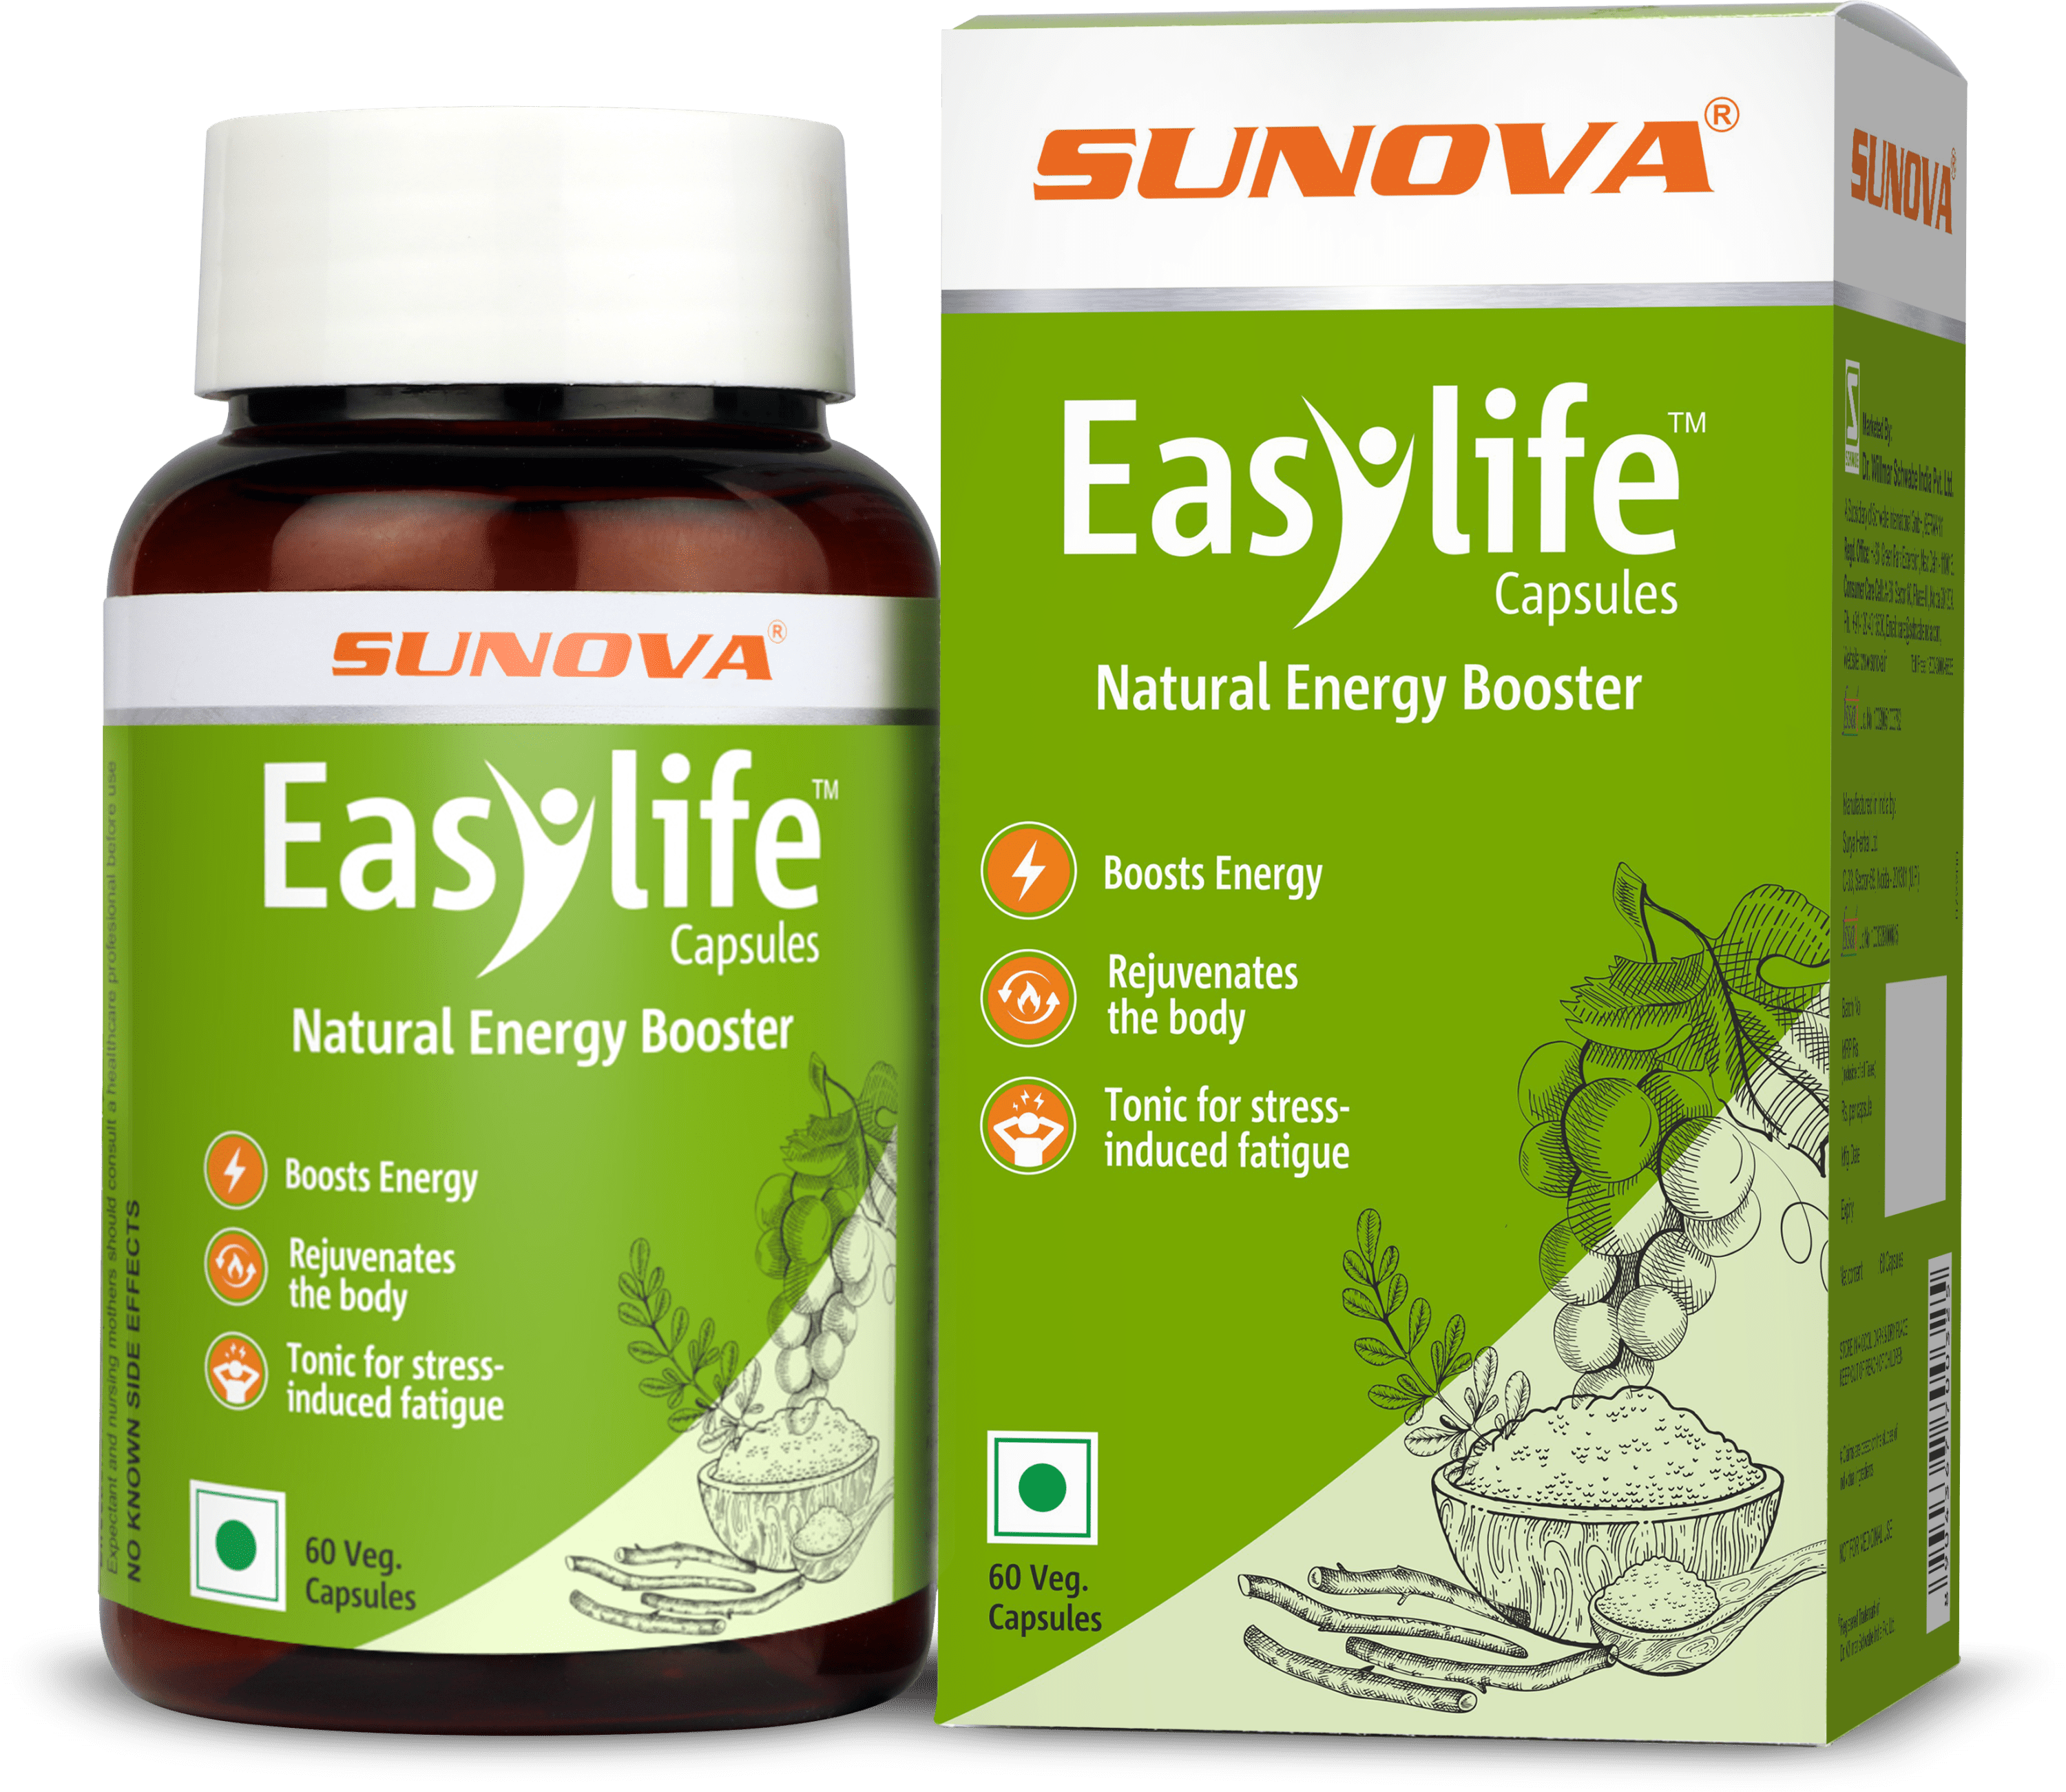 Sunova Easylife Natural Energy Boosters